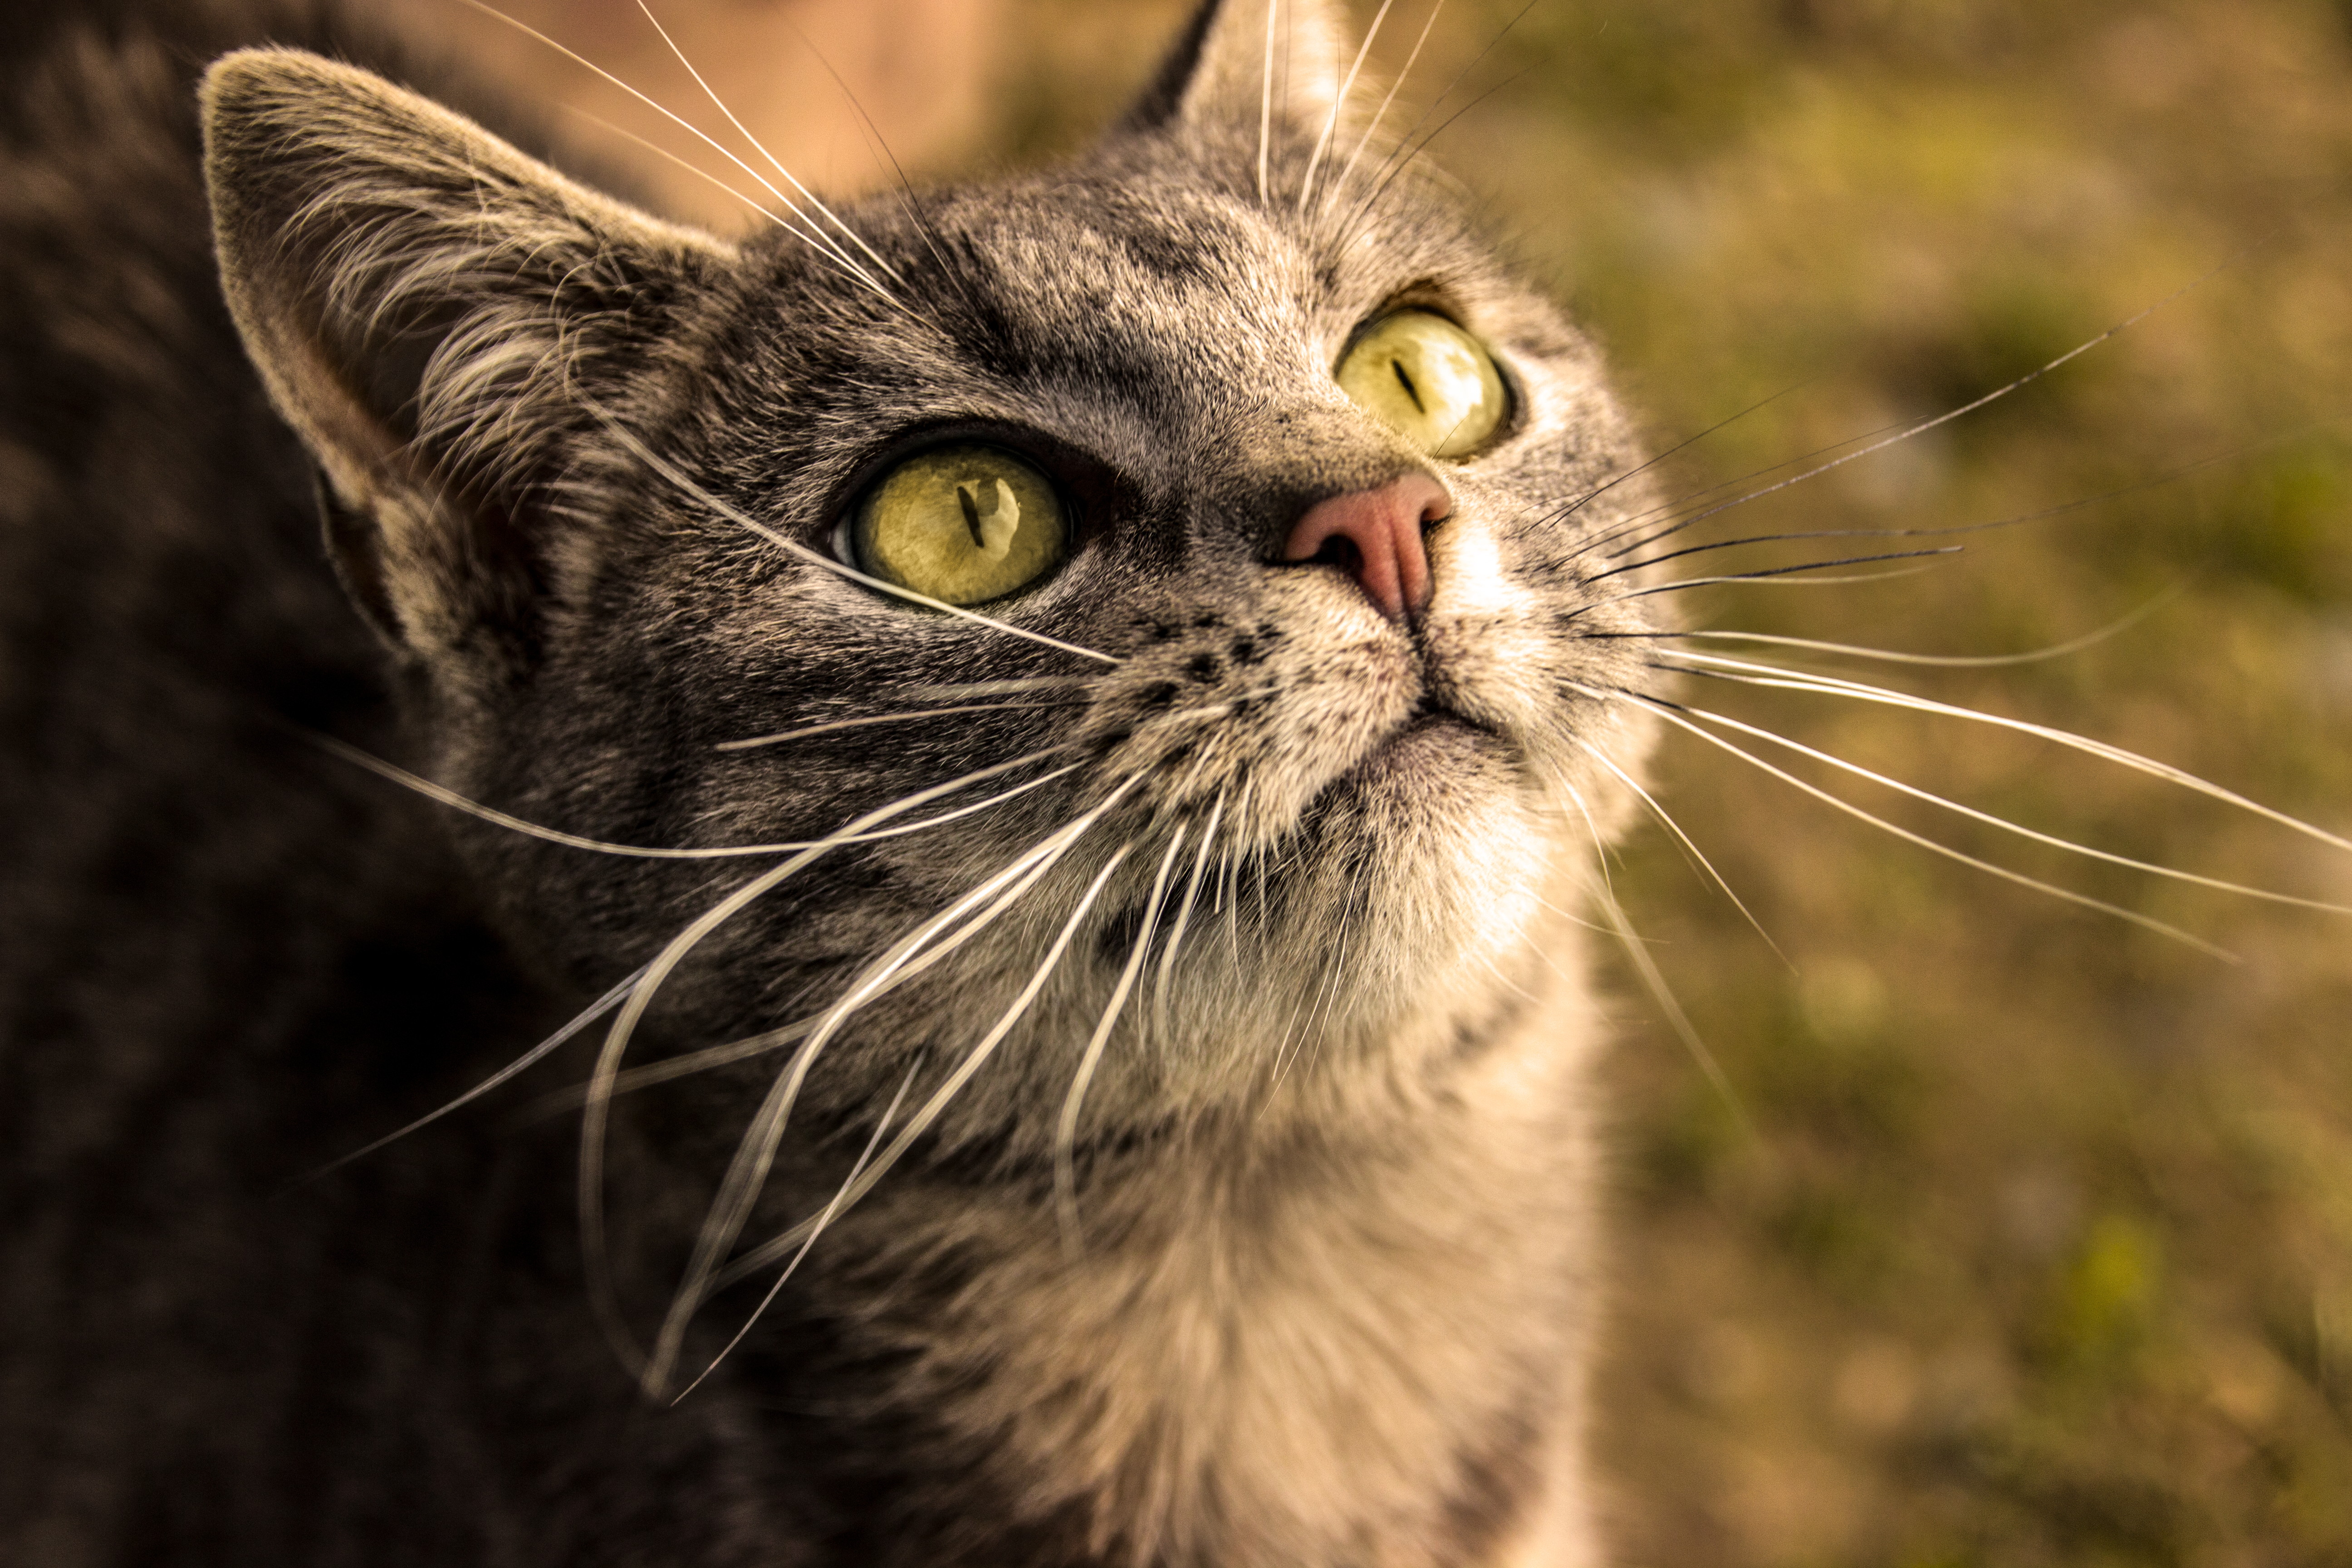 General 5184x3456 cats cat eyes animals yellow eyes grass nose